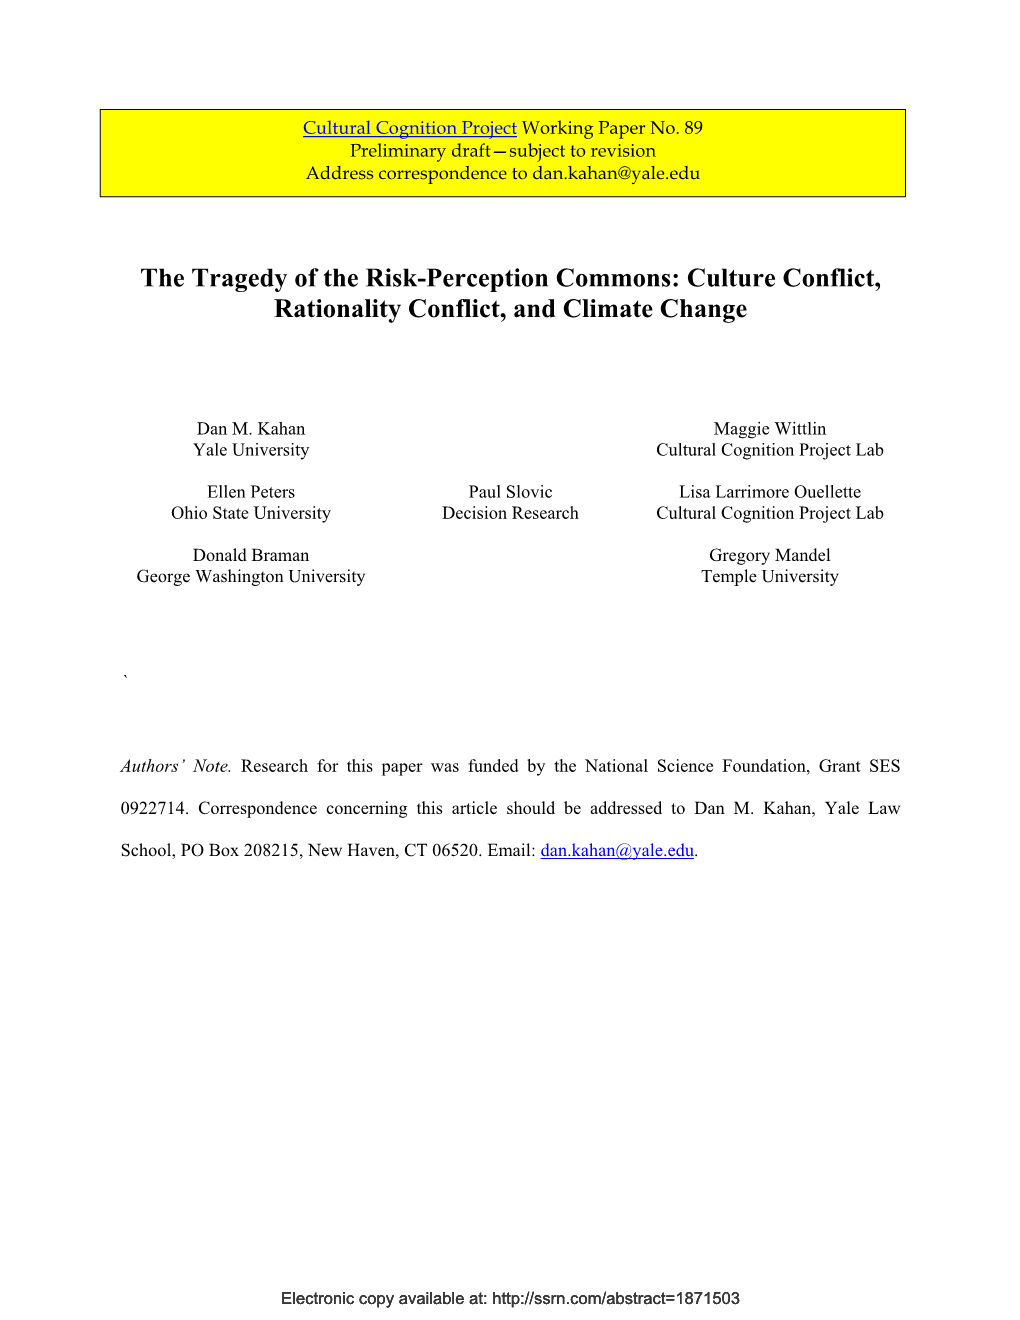 The Tragedy of the Risk-Perception Commons: Culture Conflict, Rationality Conflict, and Climate Change